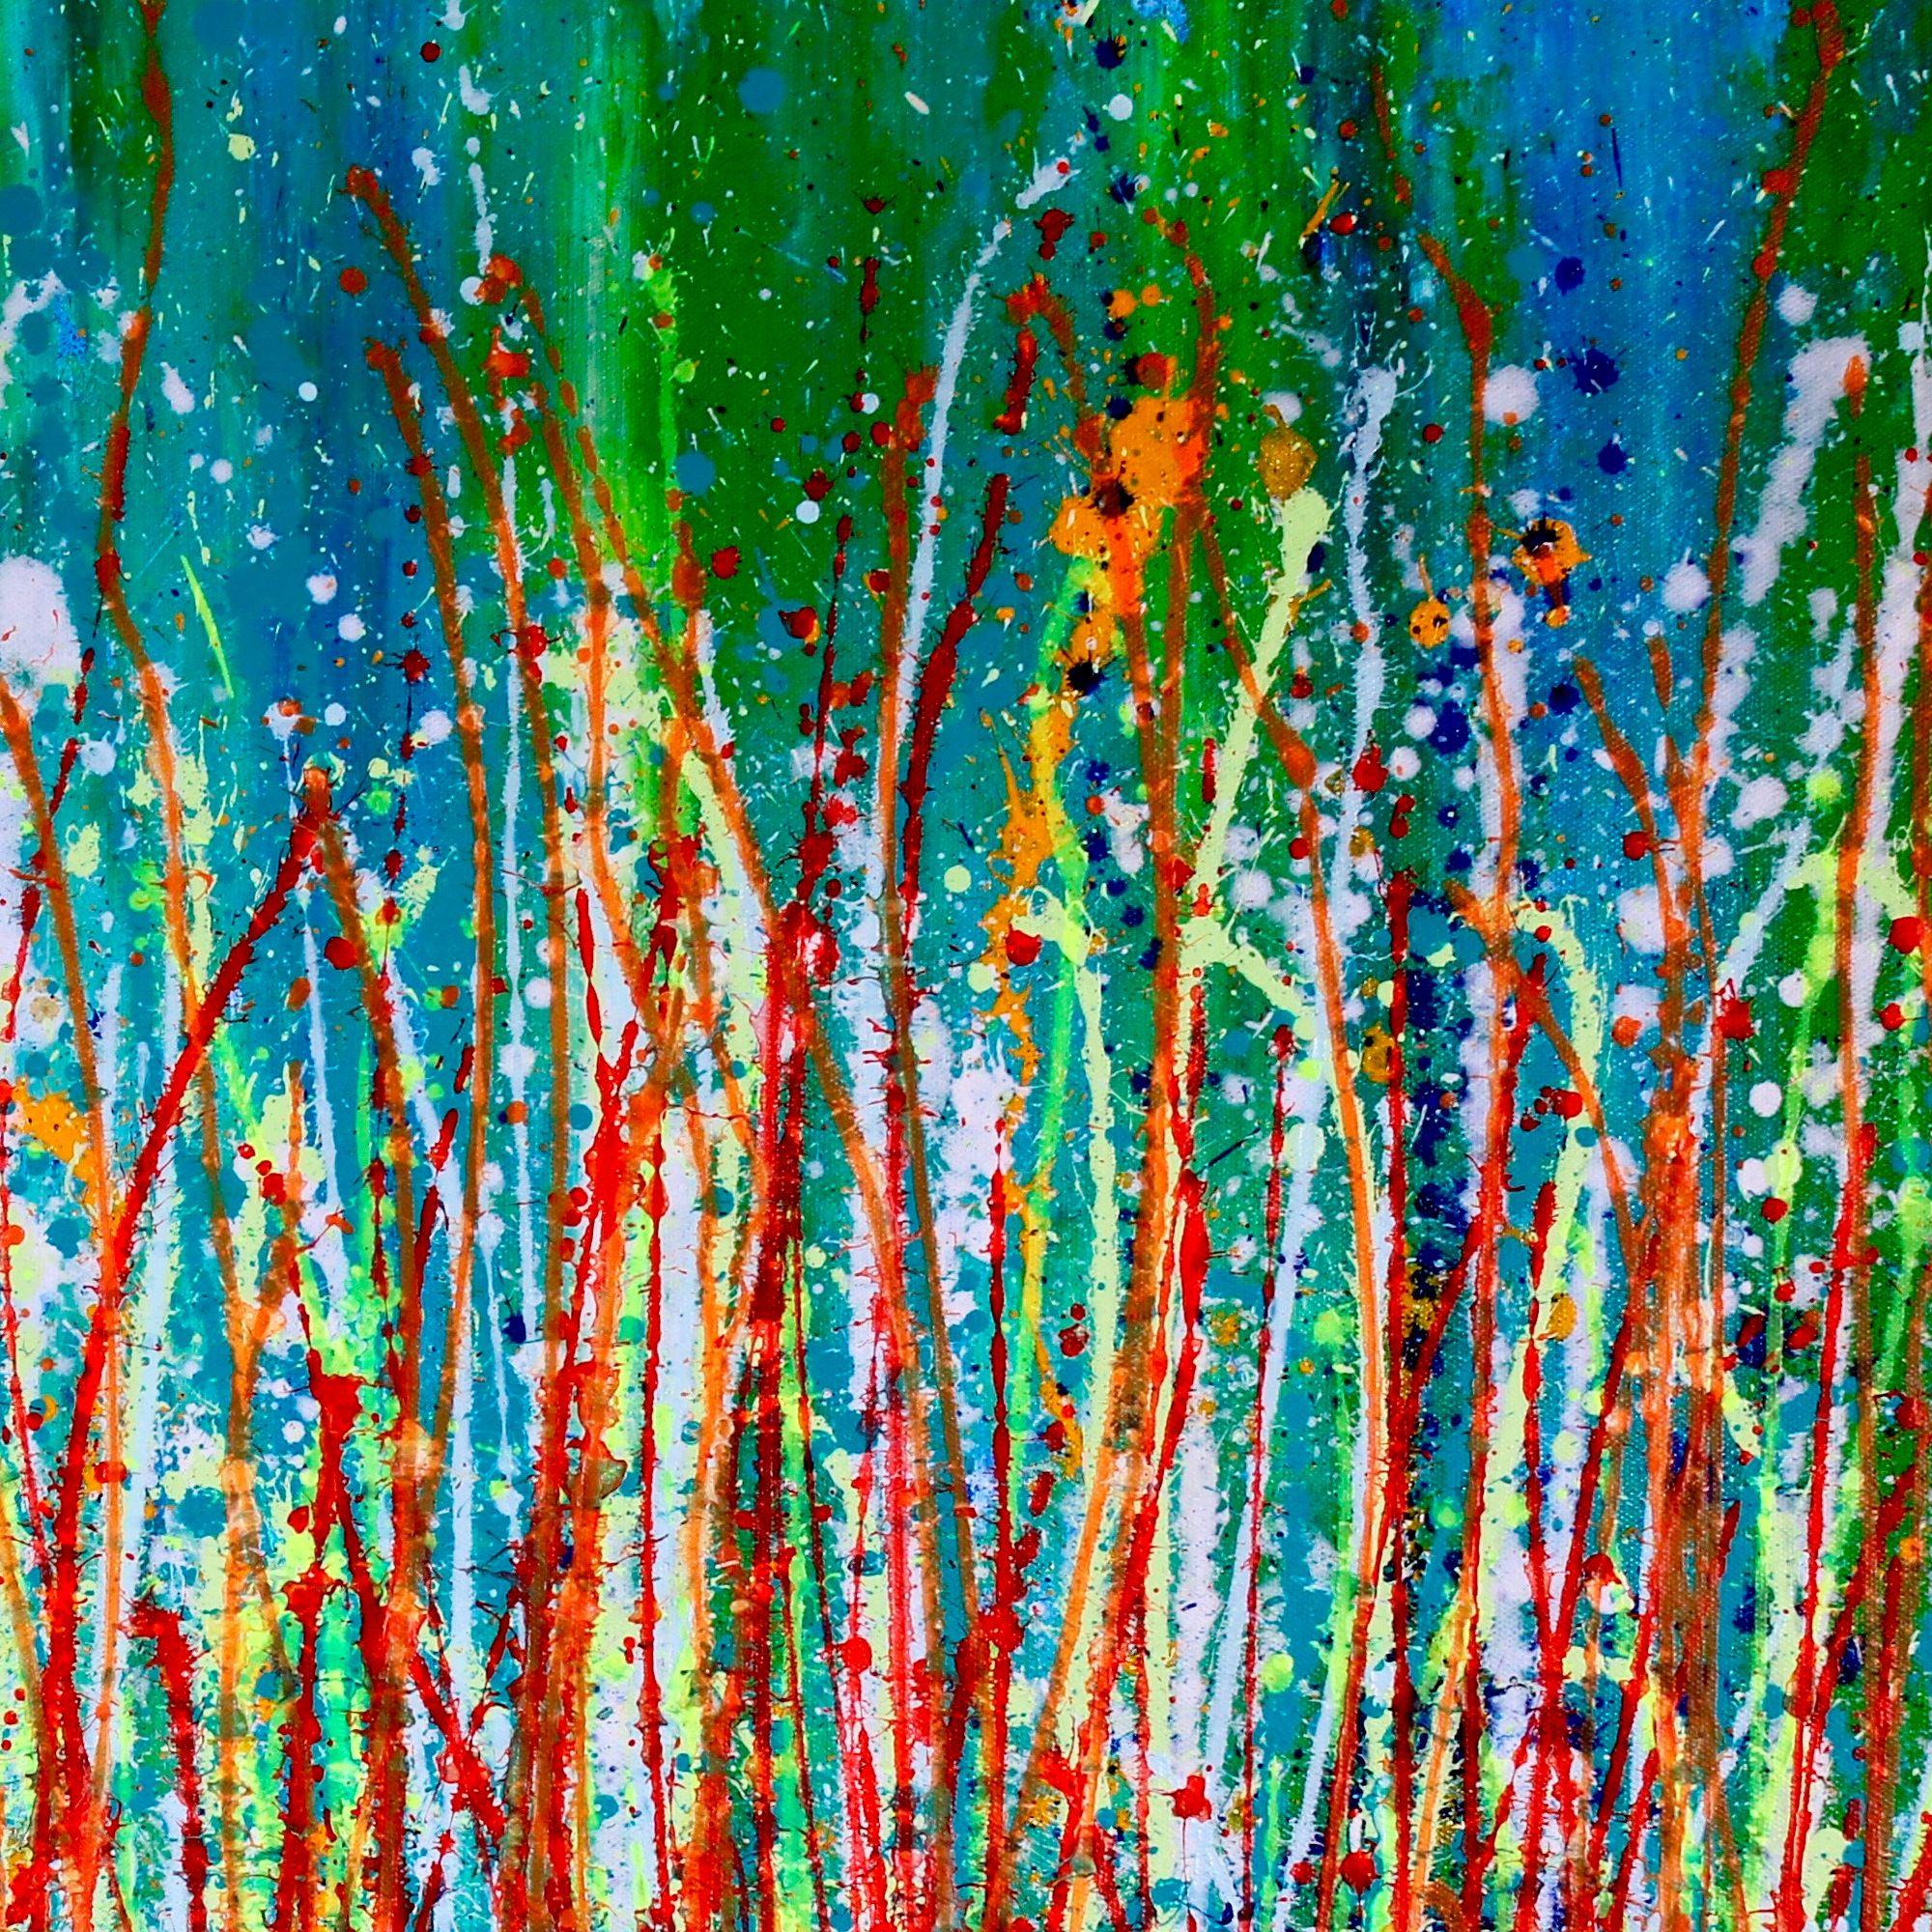 Abstract expressionistic bold painting with a lot of shades of green, bright red, orange, some yellow and blue. lots of motion and action!     This artwork is on gallery quality heavy triple primed cotton canvas. Signed     I include a certificate